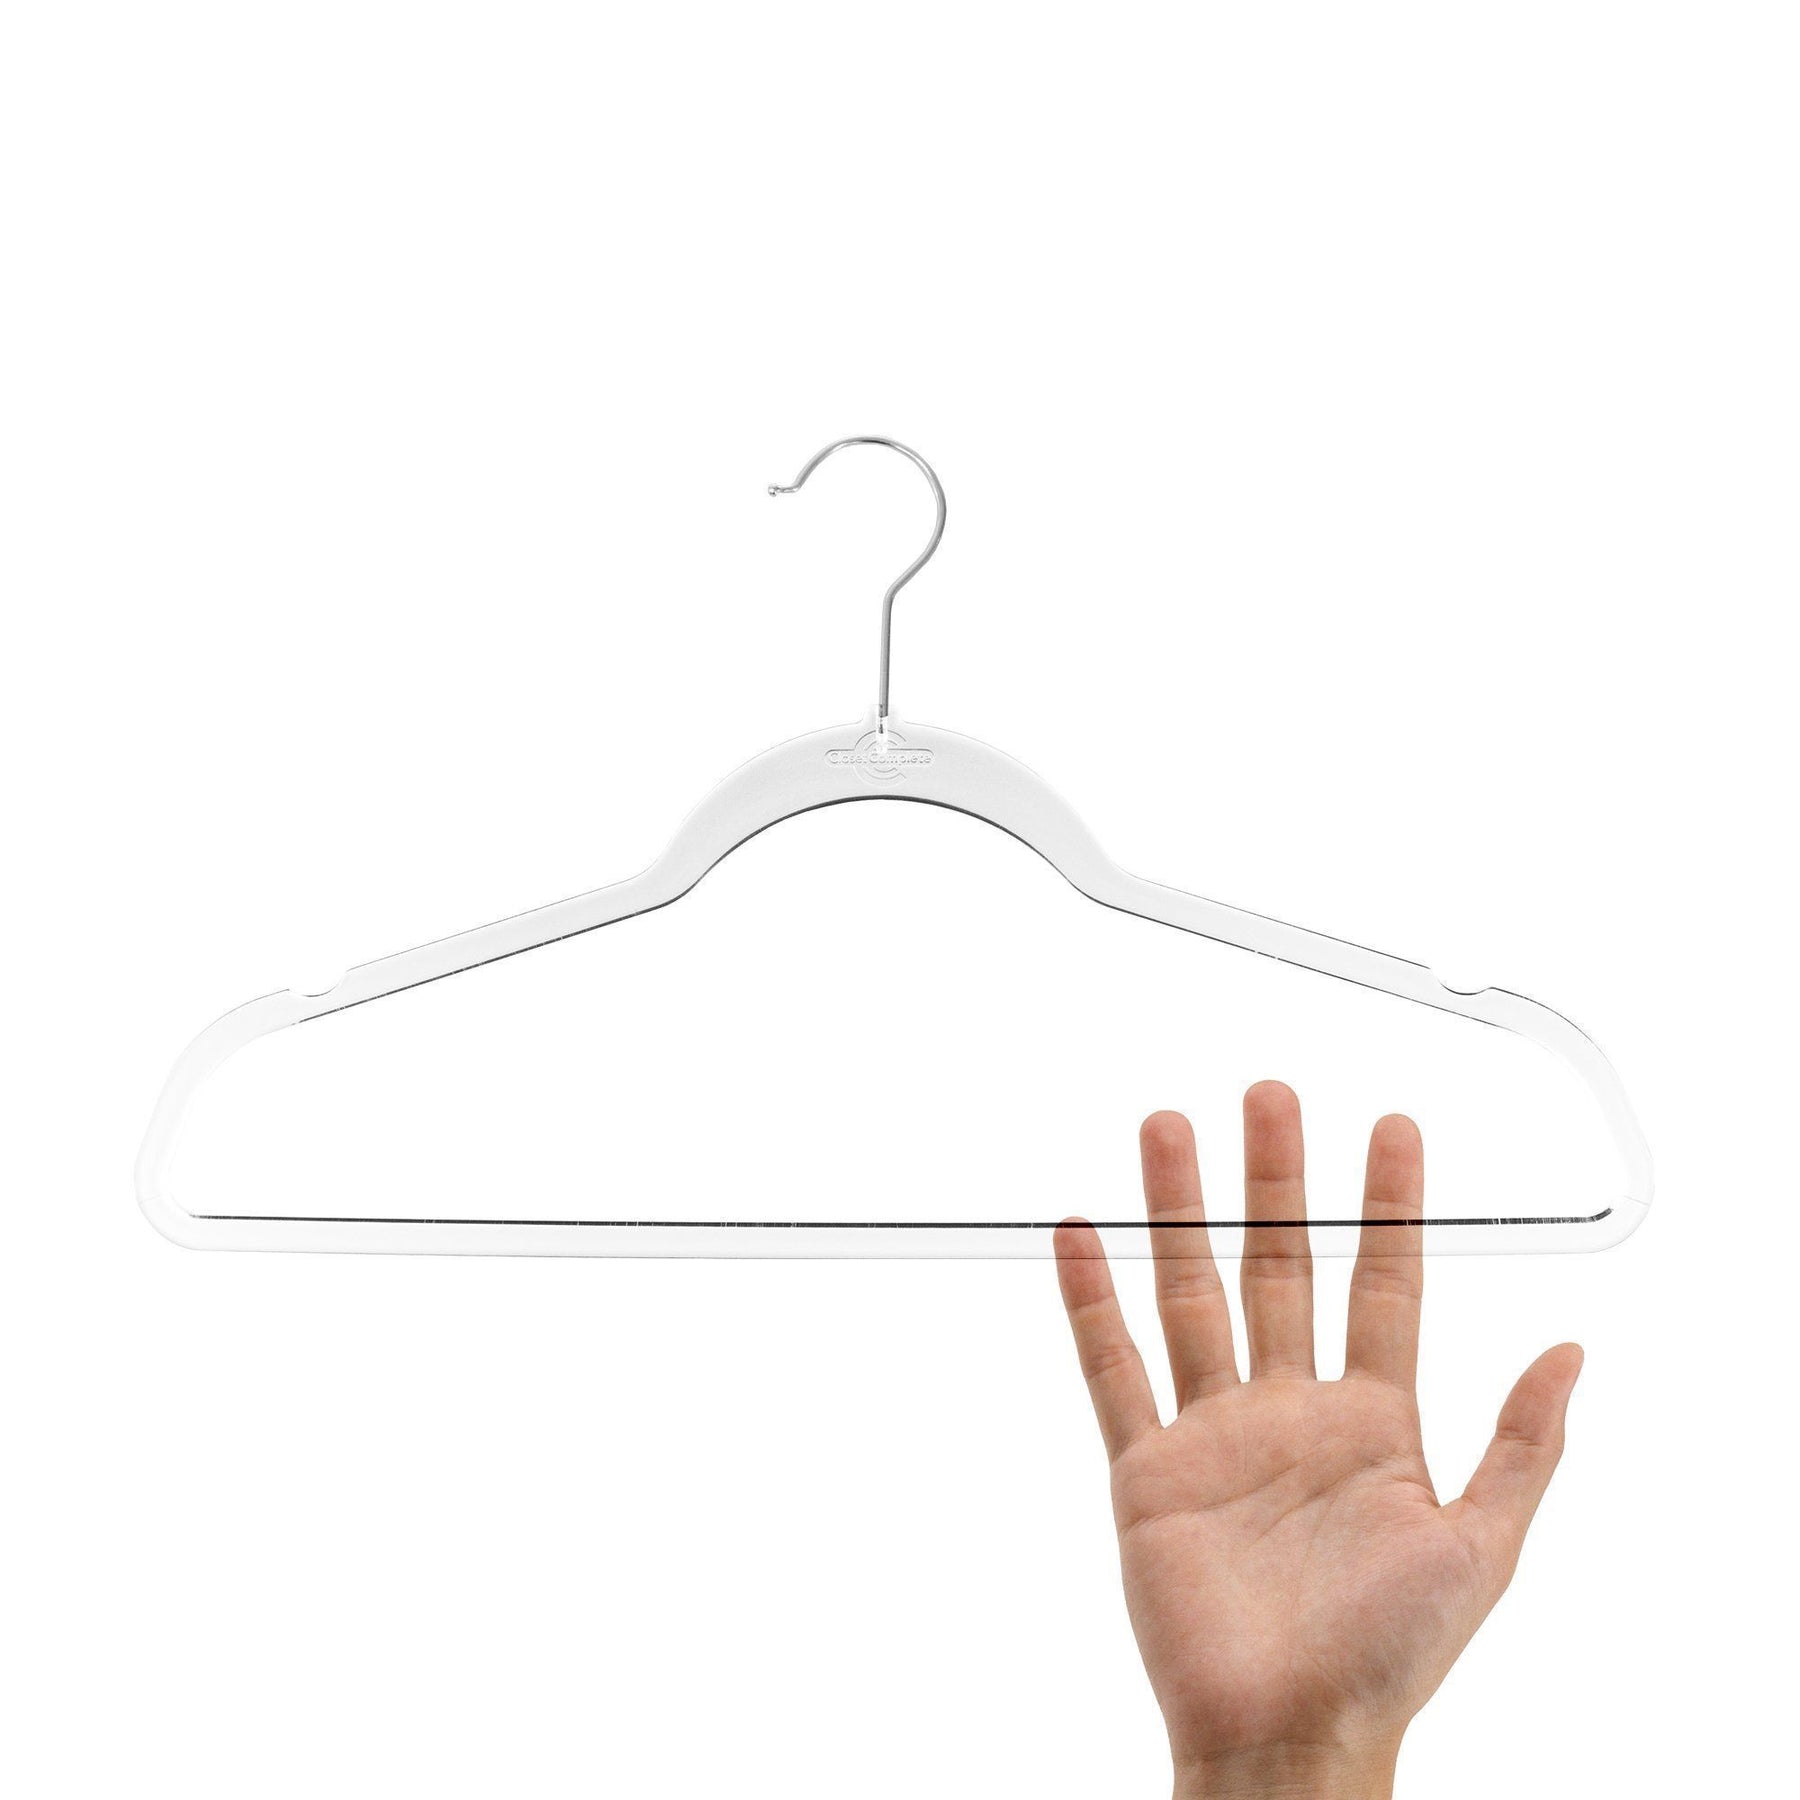 DesignStyles Clear Acrylic Clothes Hangers w/Hanging Clips - 10 Pk